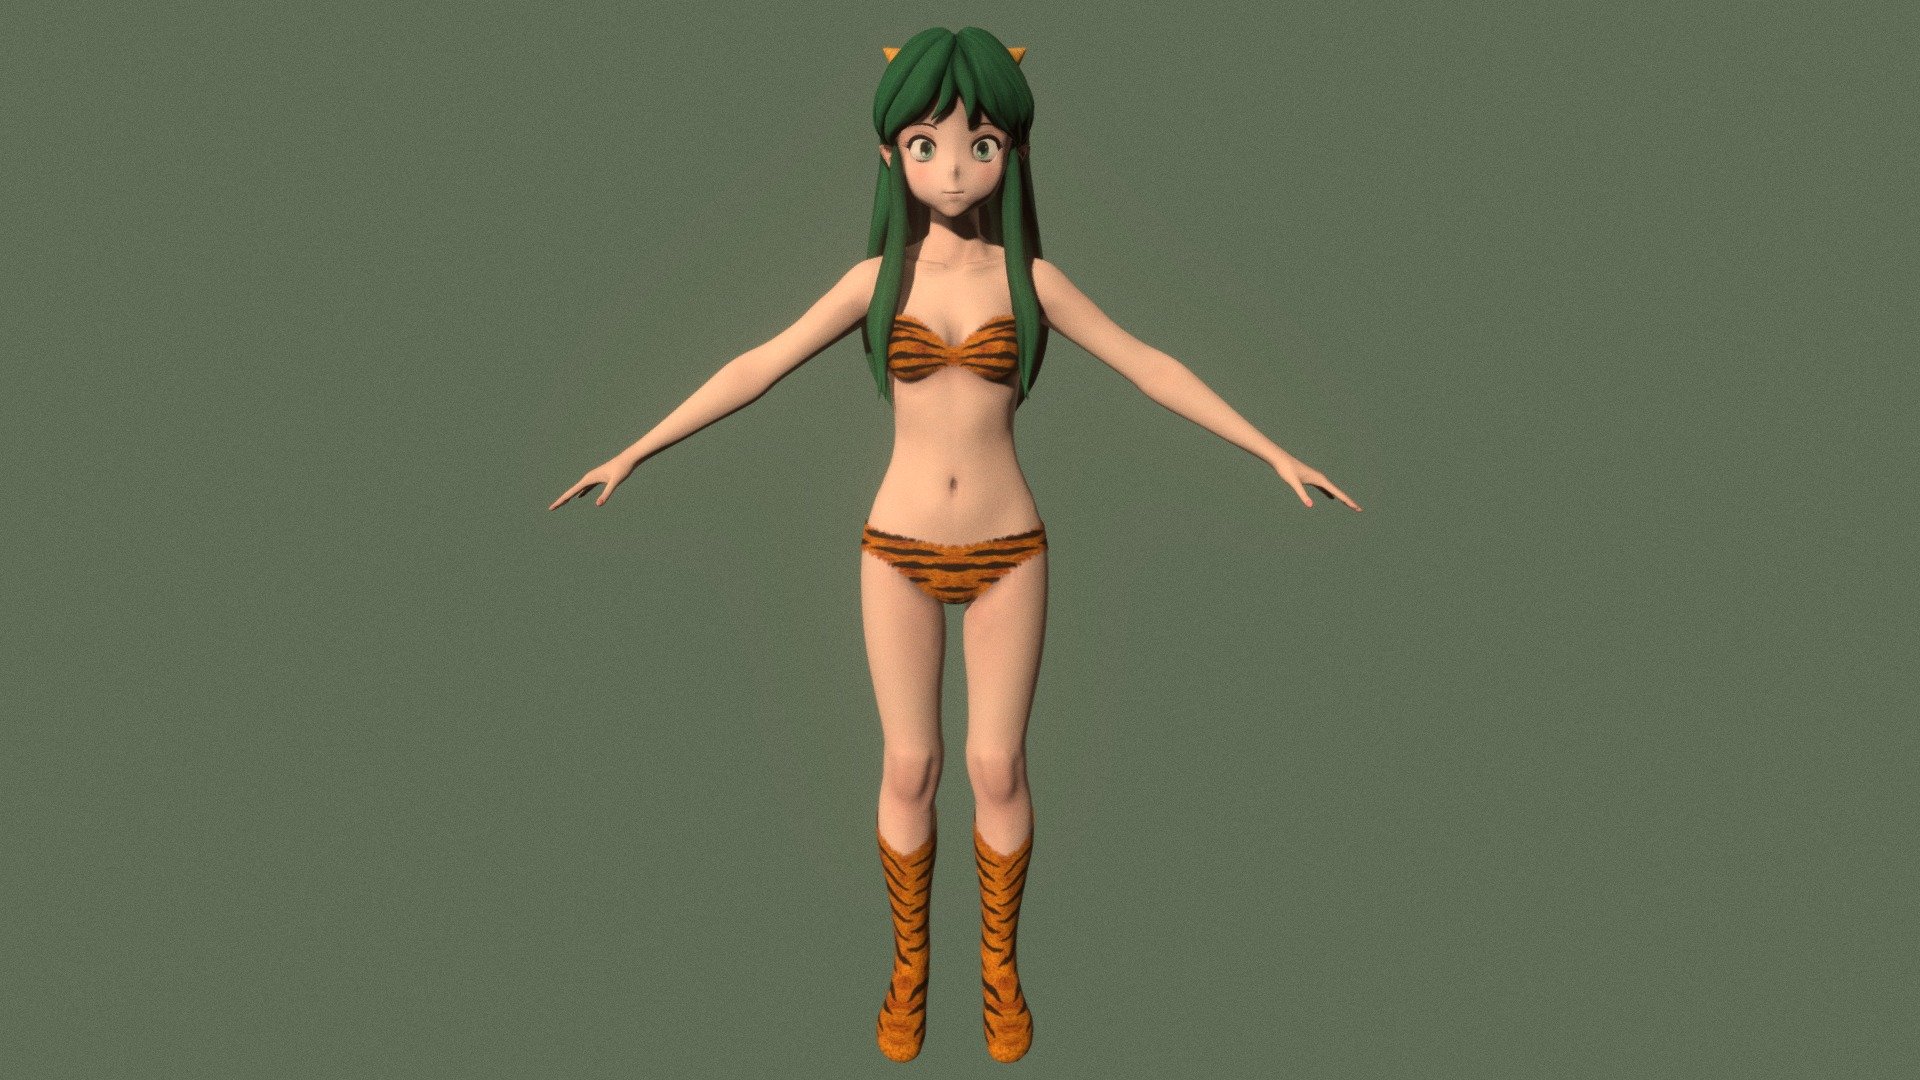 T-pose rigged model of anime girl Lum (Urusei Yatsura).

Body and clothings are rigged and skinned by 3ds Max CAT system.

Eye direction and facial animation controlled by Morpher modifier / Shape Keys / Blendshape.

This product include .FBX (ver. 7200) and .MAX (ver. 2010) files.

3ds Max version is turbosmoothed to give a high quality render (as you can see here).

Original main body mesh have ~7.000 polys.

This 3D model may need some tweaking to adapt the rig system to games engine and other platforms.

I support convert model to various file formats (the rig data will be lost in this process): 3DS; AI; ASE; DAE; DWF; DWG; DXF; FLT; HTR; IGS; M3G; MQO; OBJ; SAT; STL; W3D; WRL; X.

You can buy all of my models in one pack to save cost: https://sketchfab.com/3d-models/all-of-my-anime-girls-c5a56156994e4193b9e8fa21a3b8360b

And I can make commission models.

If you have any questions, please leave a comment or contact me via my email 3d.eden.project@gmail.com 3d model